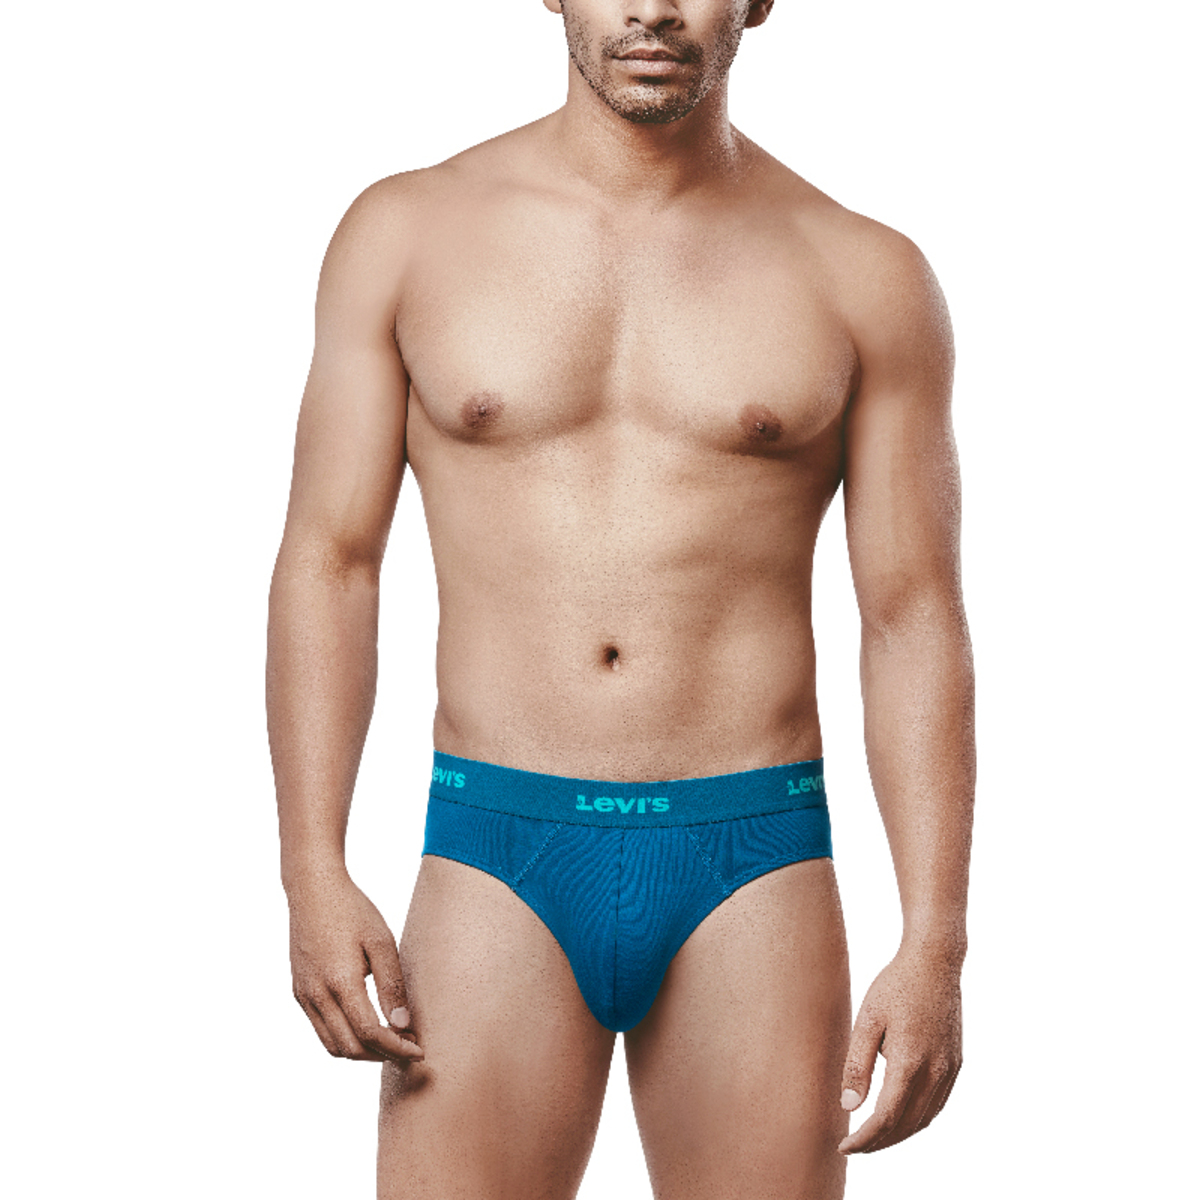 Levis Mens Classic Brief 002 Teal Large